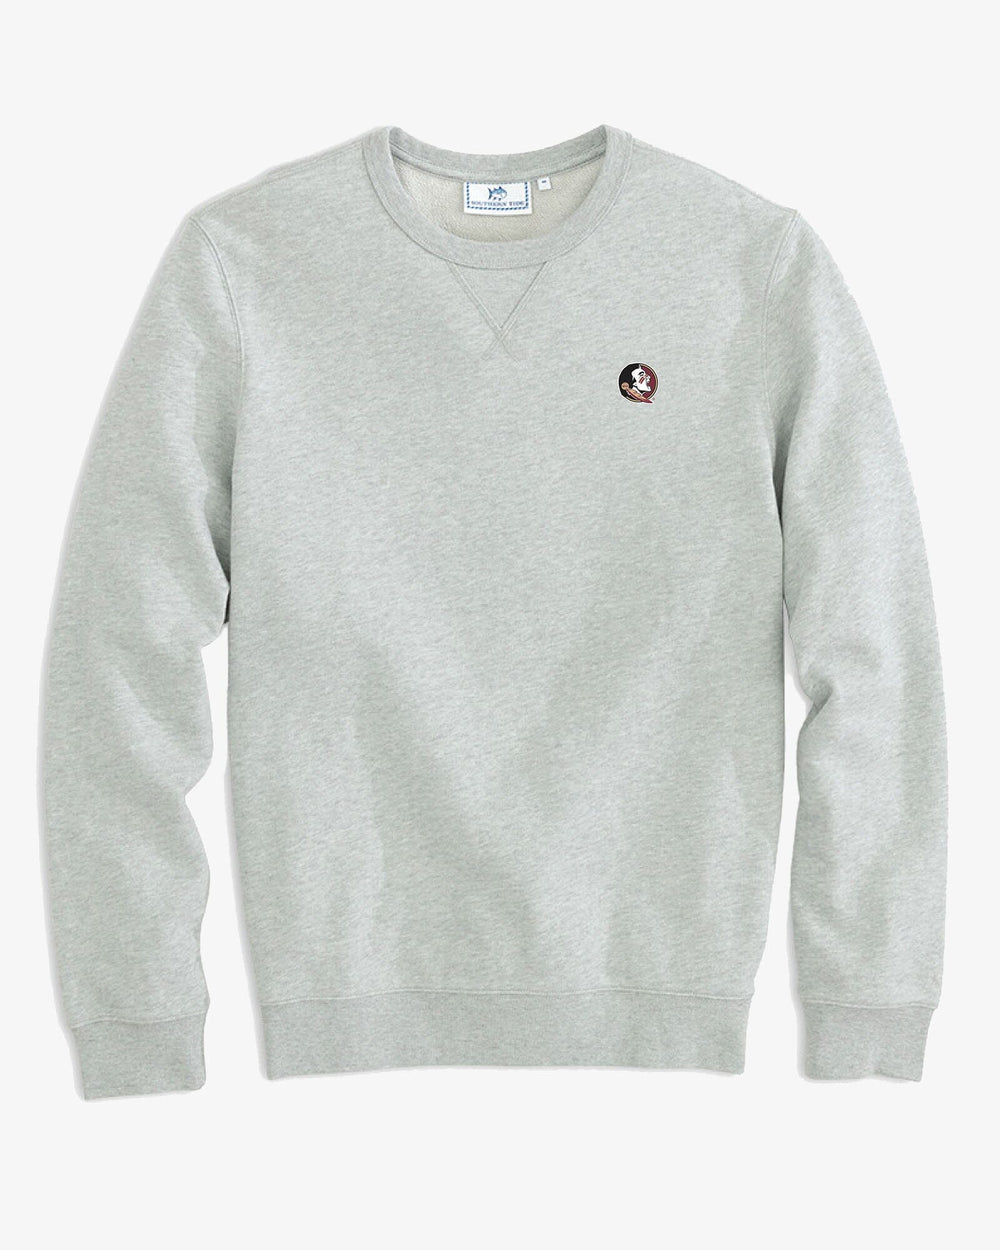 The front view of the FSU Upper Deck Pullover Sweatshirt by Southern Tide - Heather Slate Grey